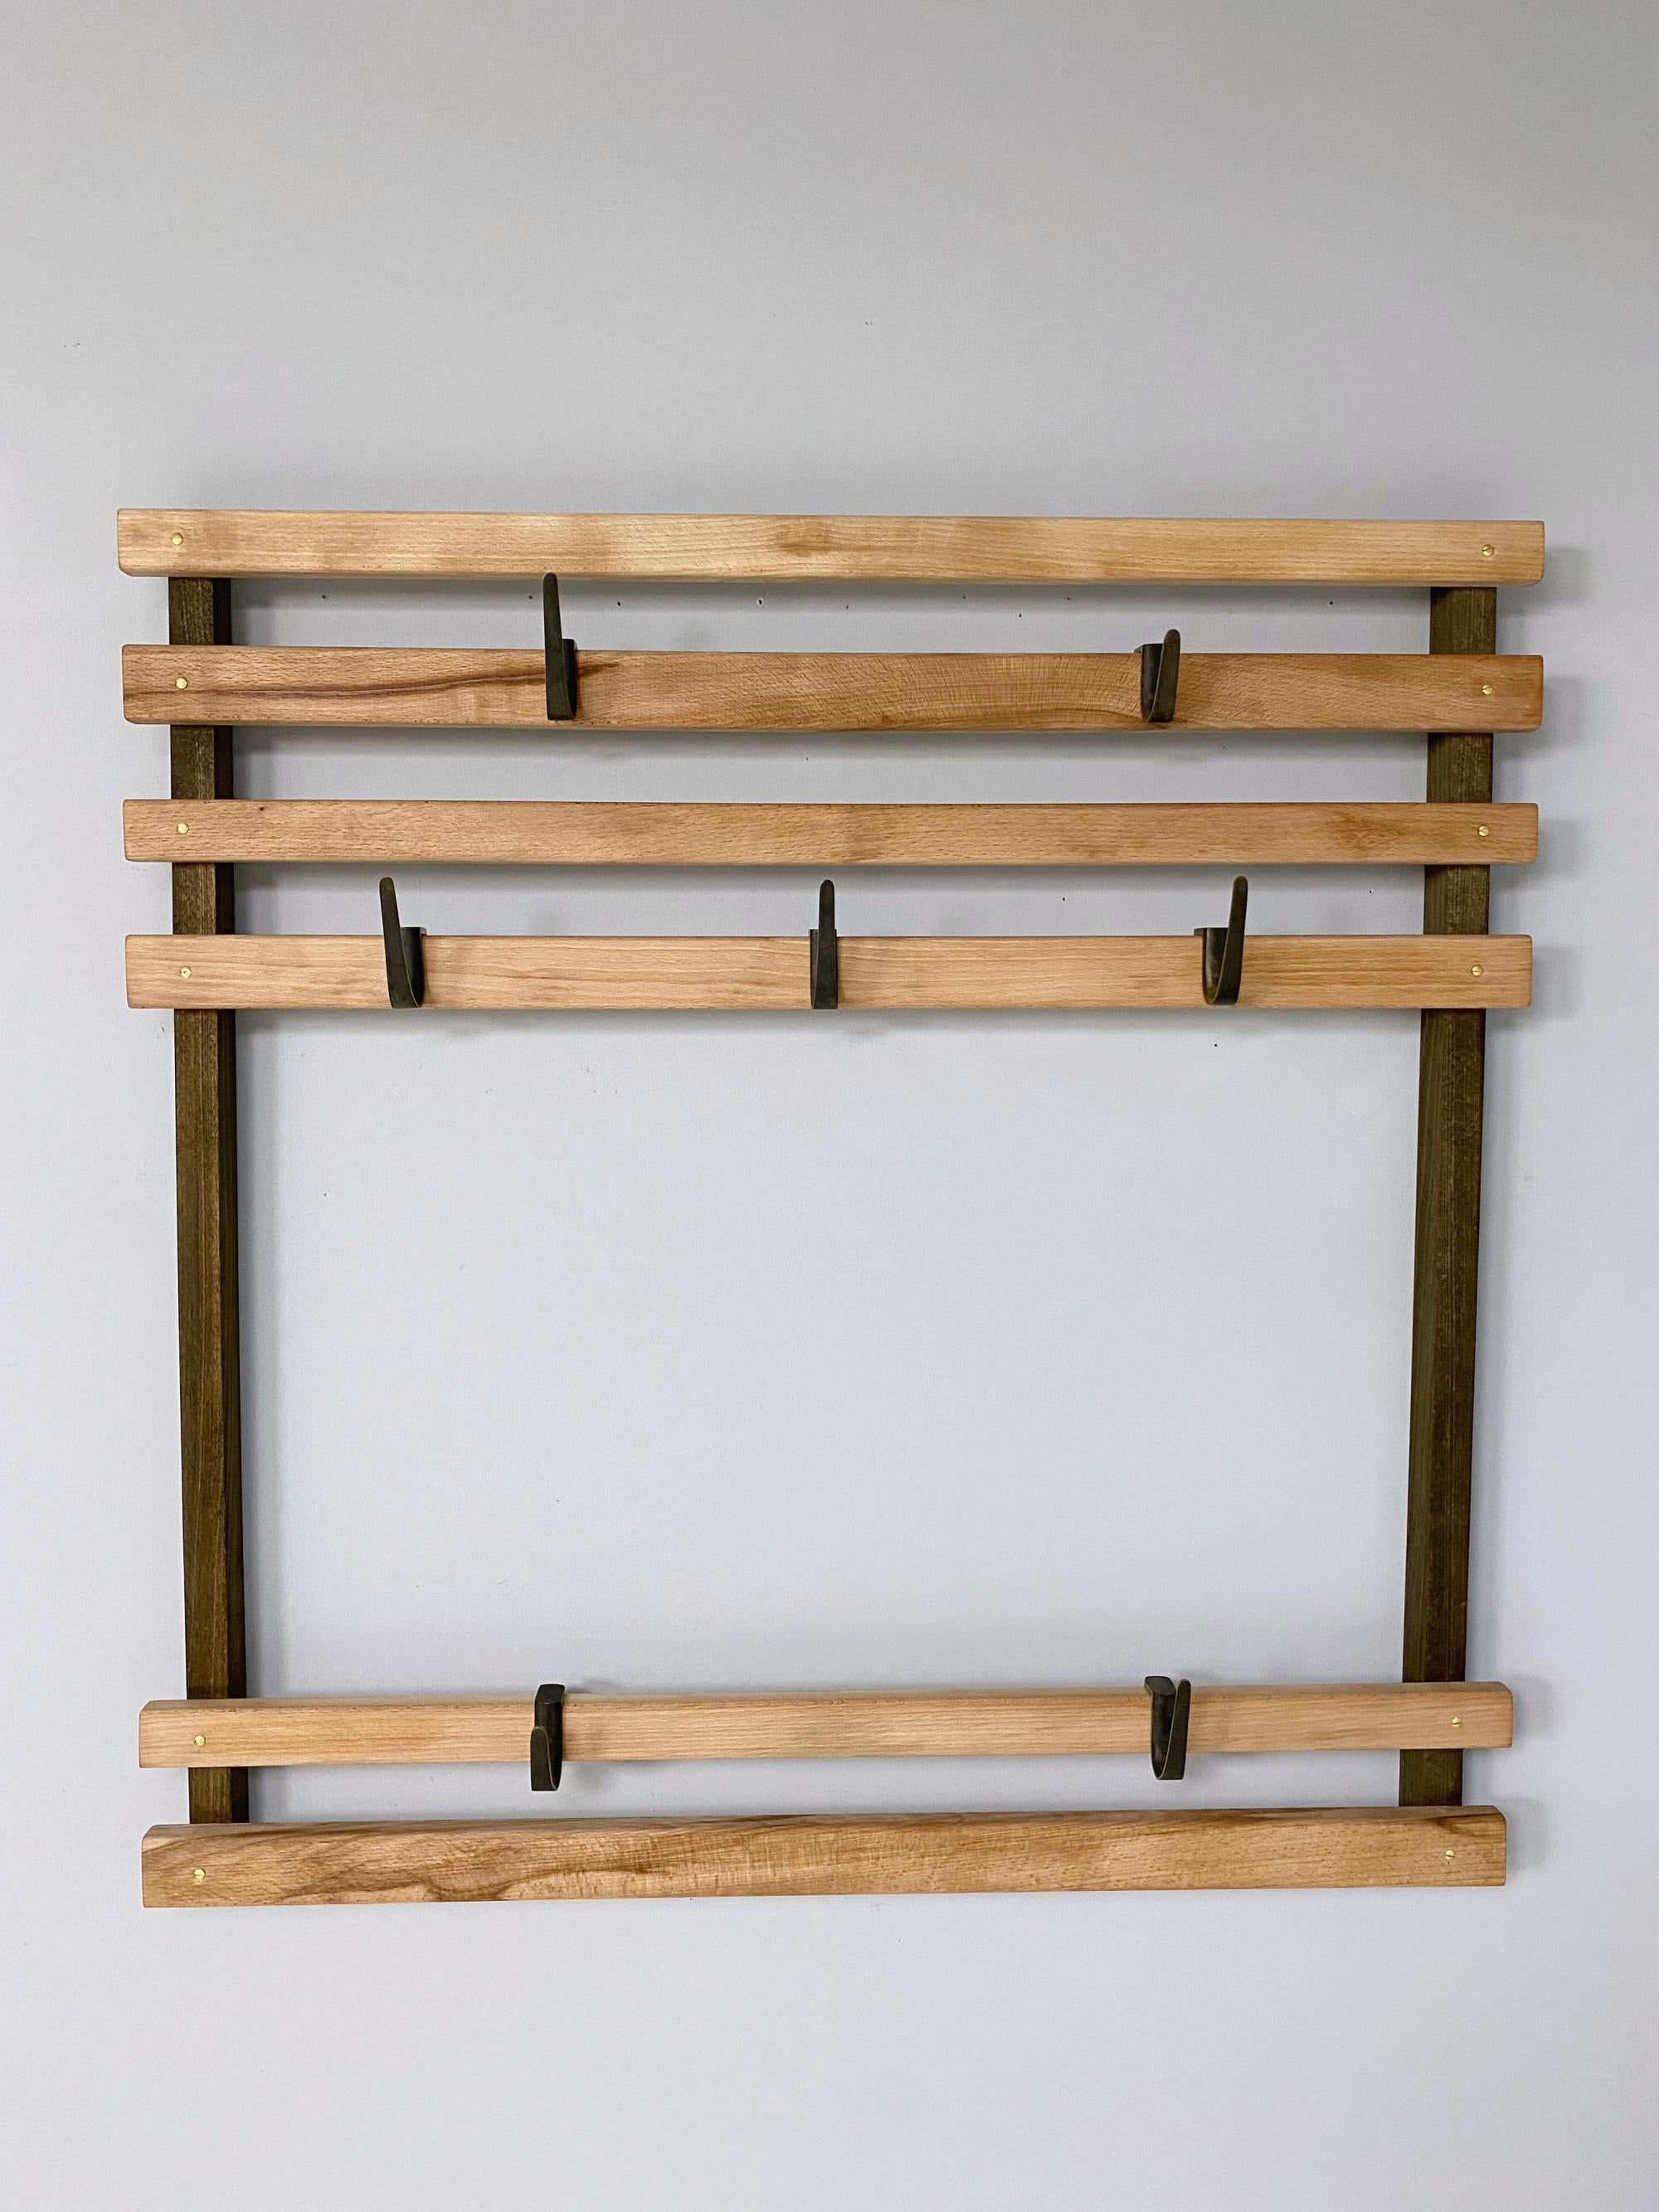 Austrian Mid-Century Modern coatrack #4547 made of solid waxed beech wood with seven patinated/polished solid brass hooks designed by Carl Auböck and handmade by Werkstätten Auböck.
Lit.: Carl Auböck the Workshop 1948 - 2005.

We ship with UPS &